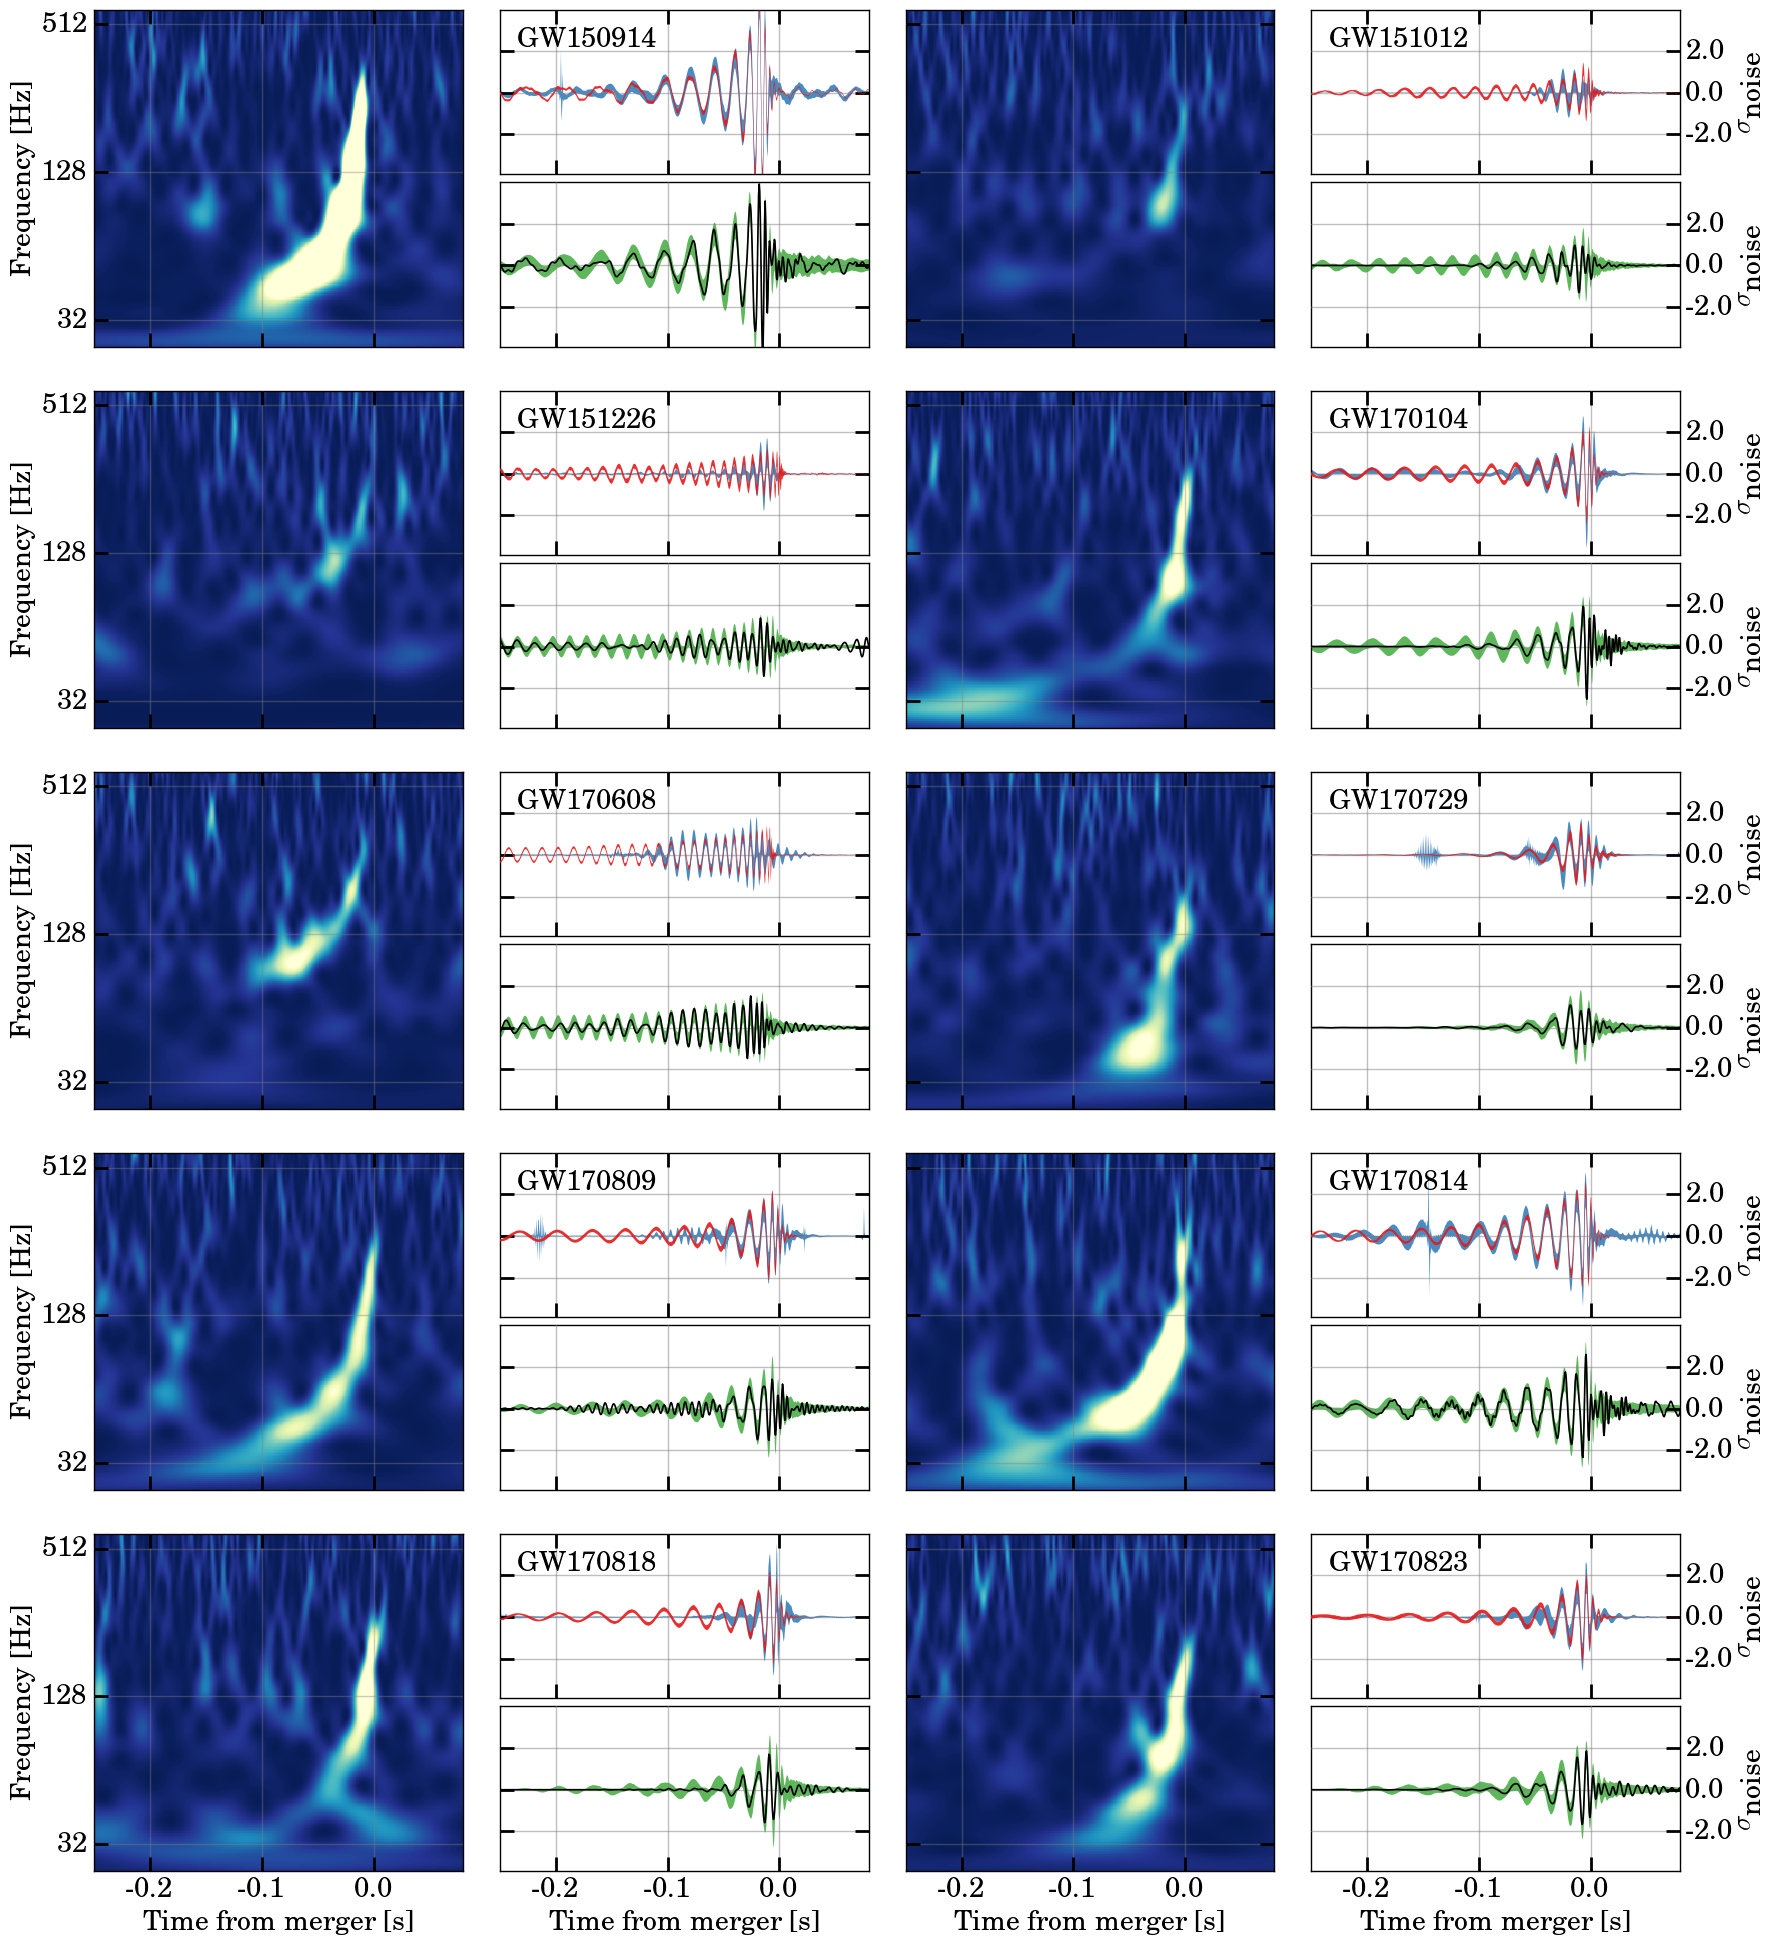 The 10 gravitational wave merger events from the first two LIGO/Virgo observing runs